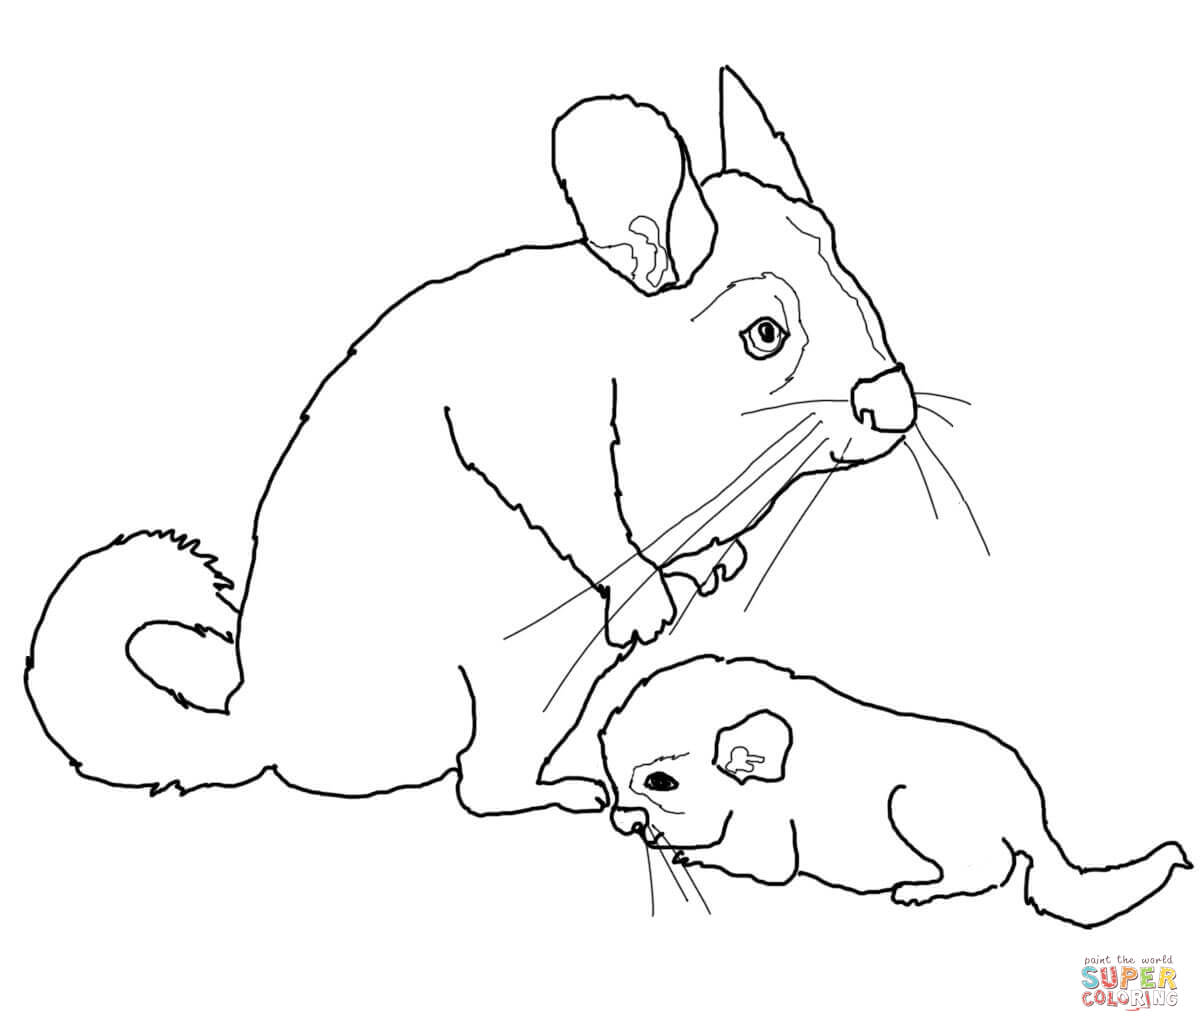 Chinchillas coloring pages | Free Coloring Pages